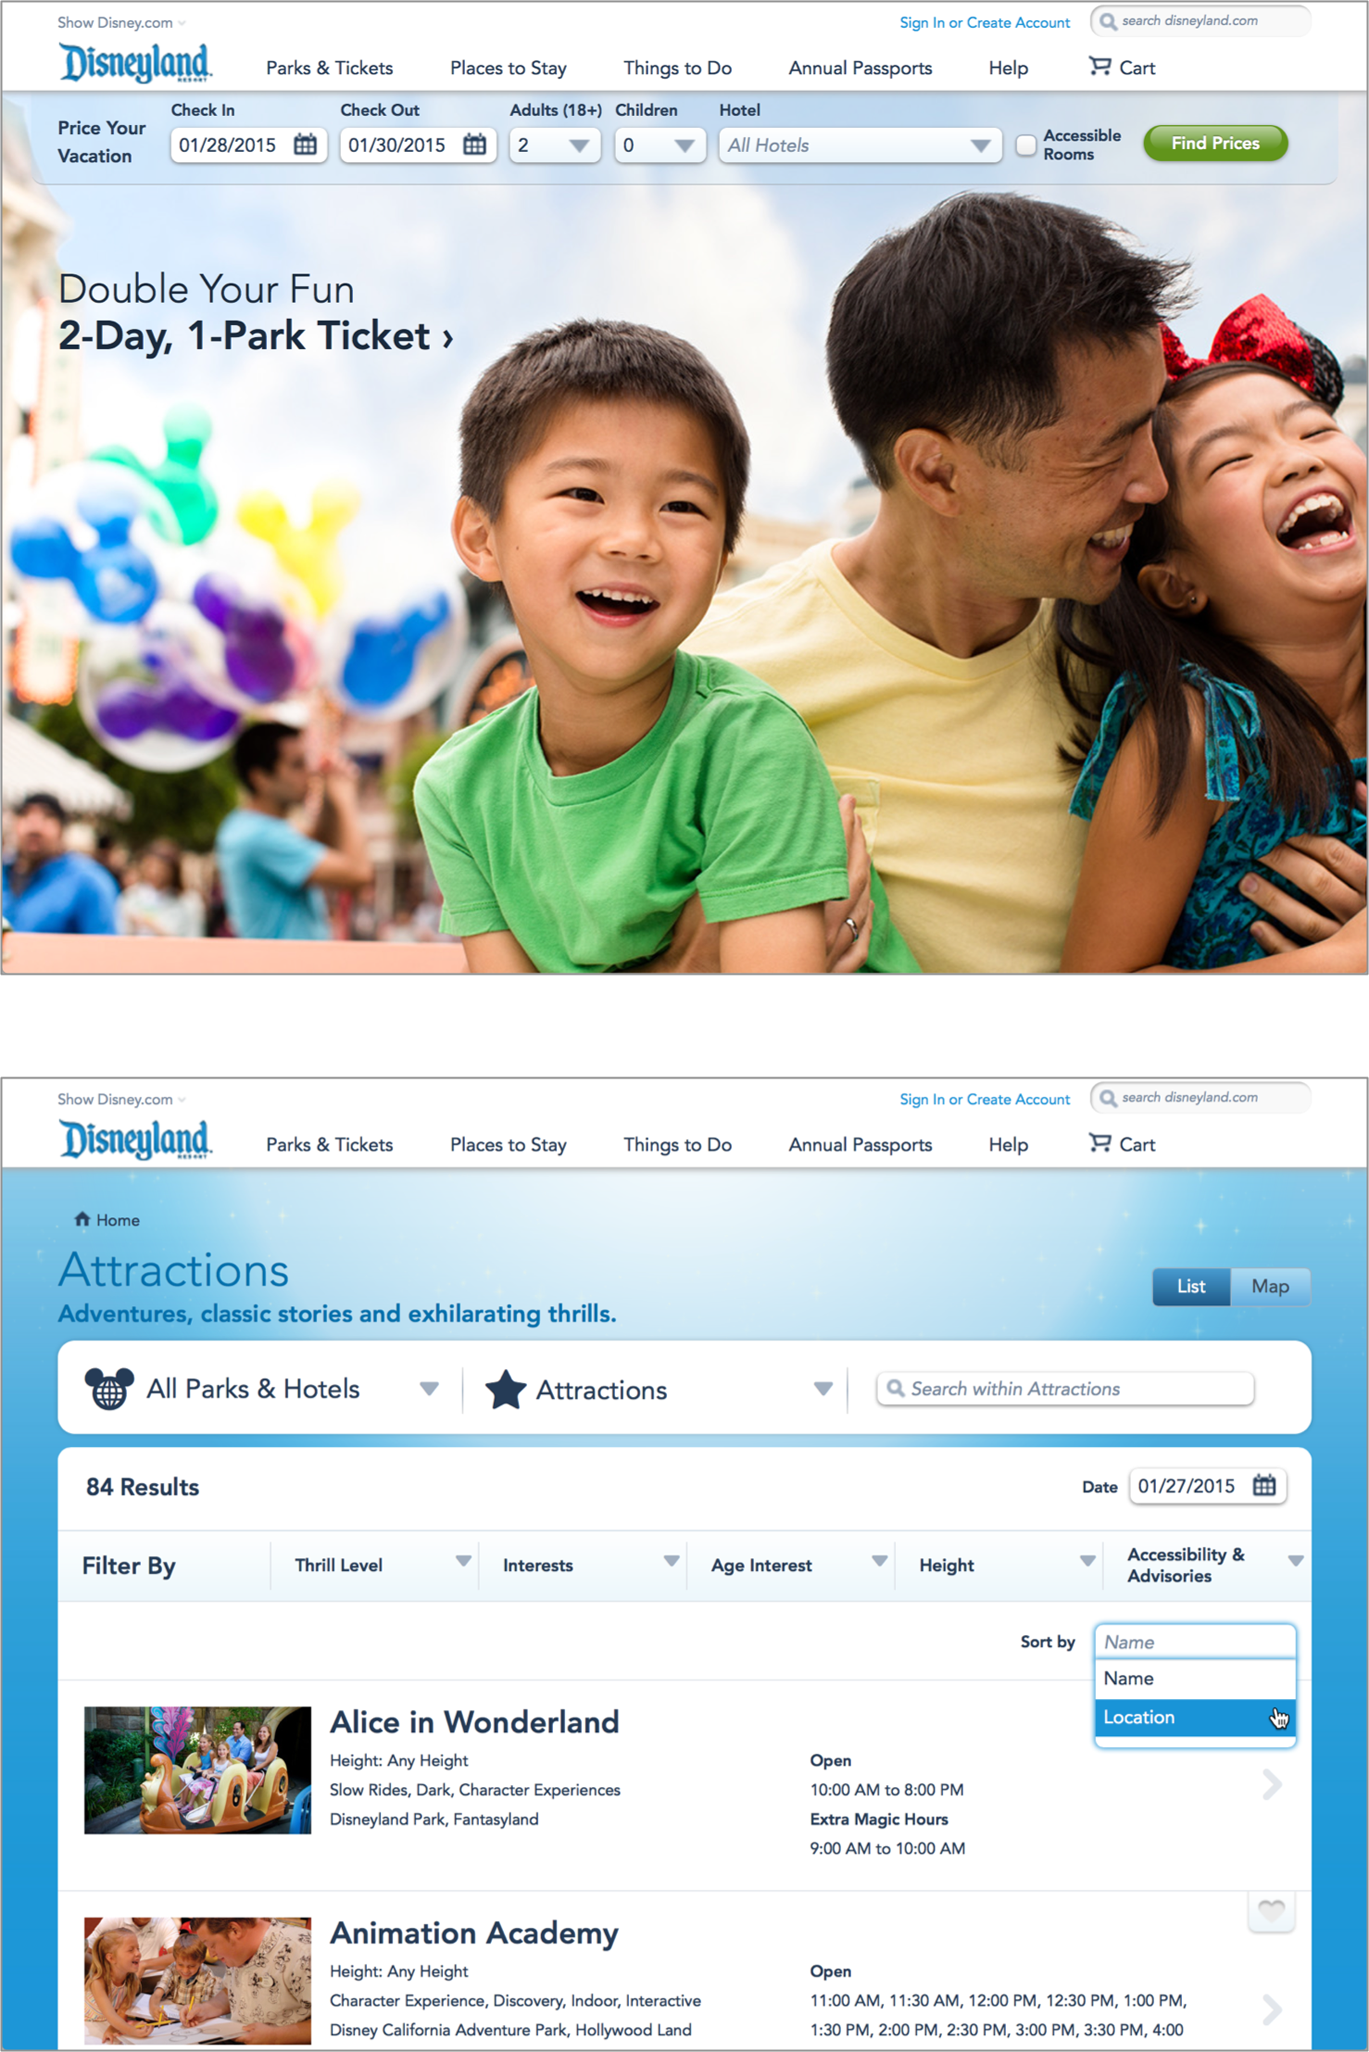 The information architecture used on Disneyland’s website is the “travel and hospitality” type; the “lands” structure, which so dominates the parks, plays a minor supporting role in the site